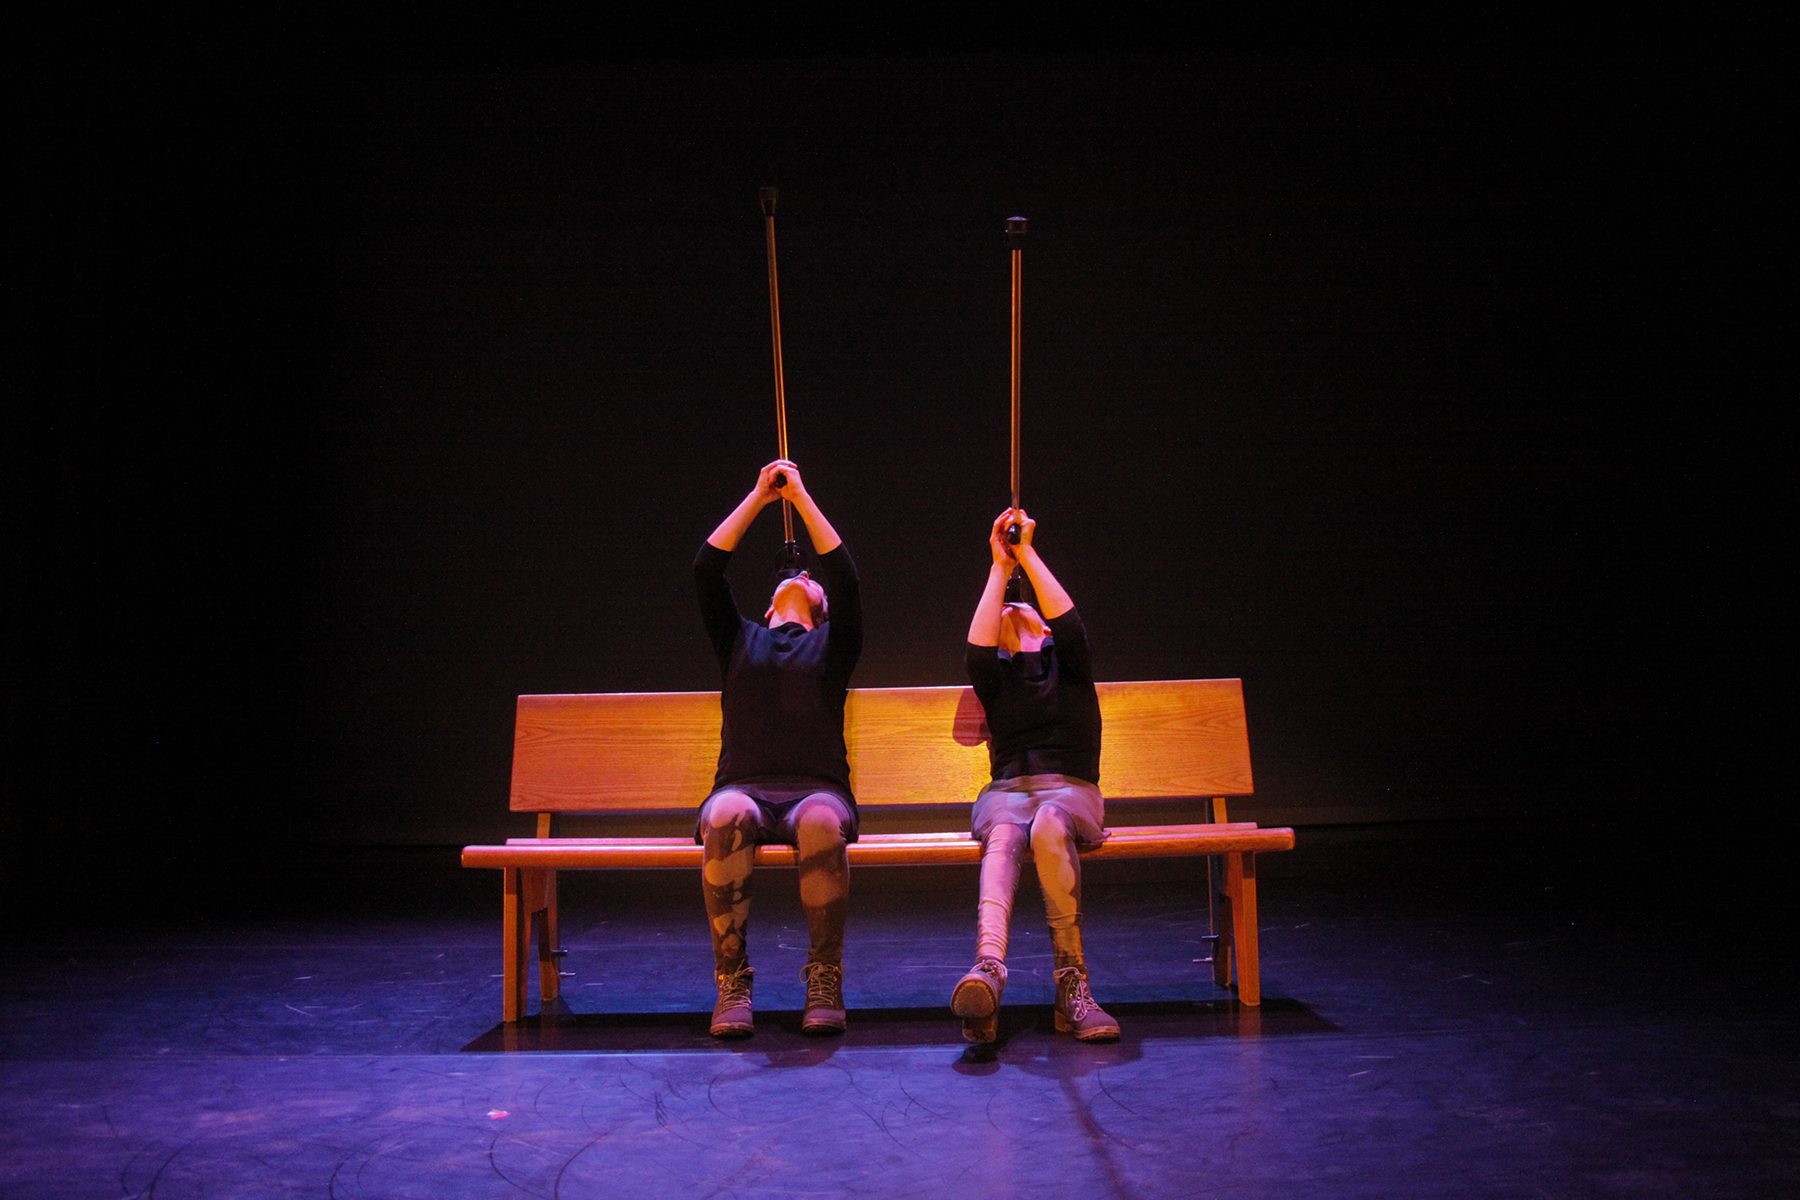 two performers with and without disabilities perform on stage. Both dancers are seated on a bench and are holding a walking crutch in the air.